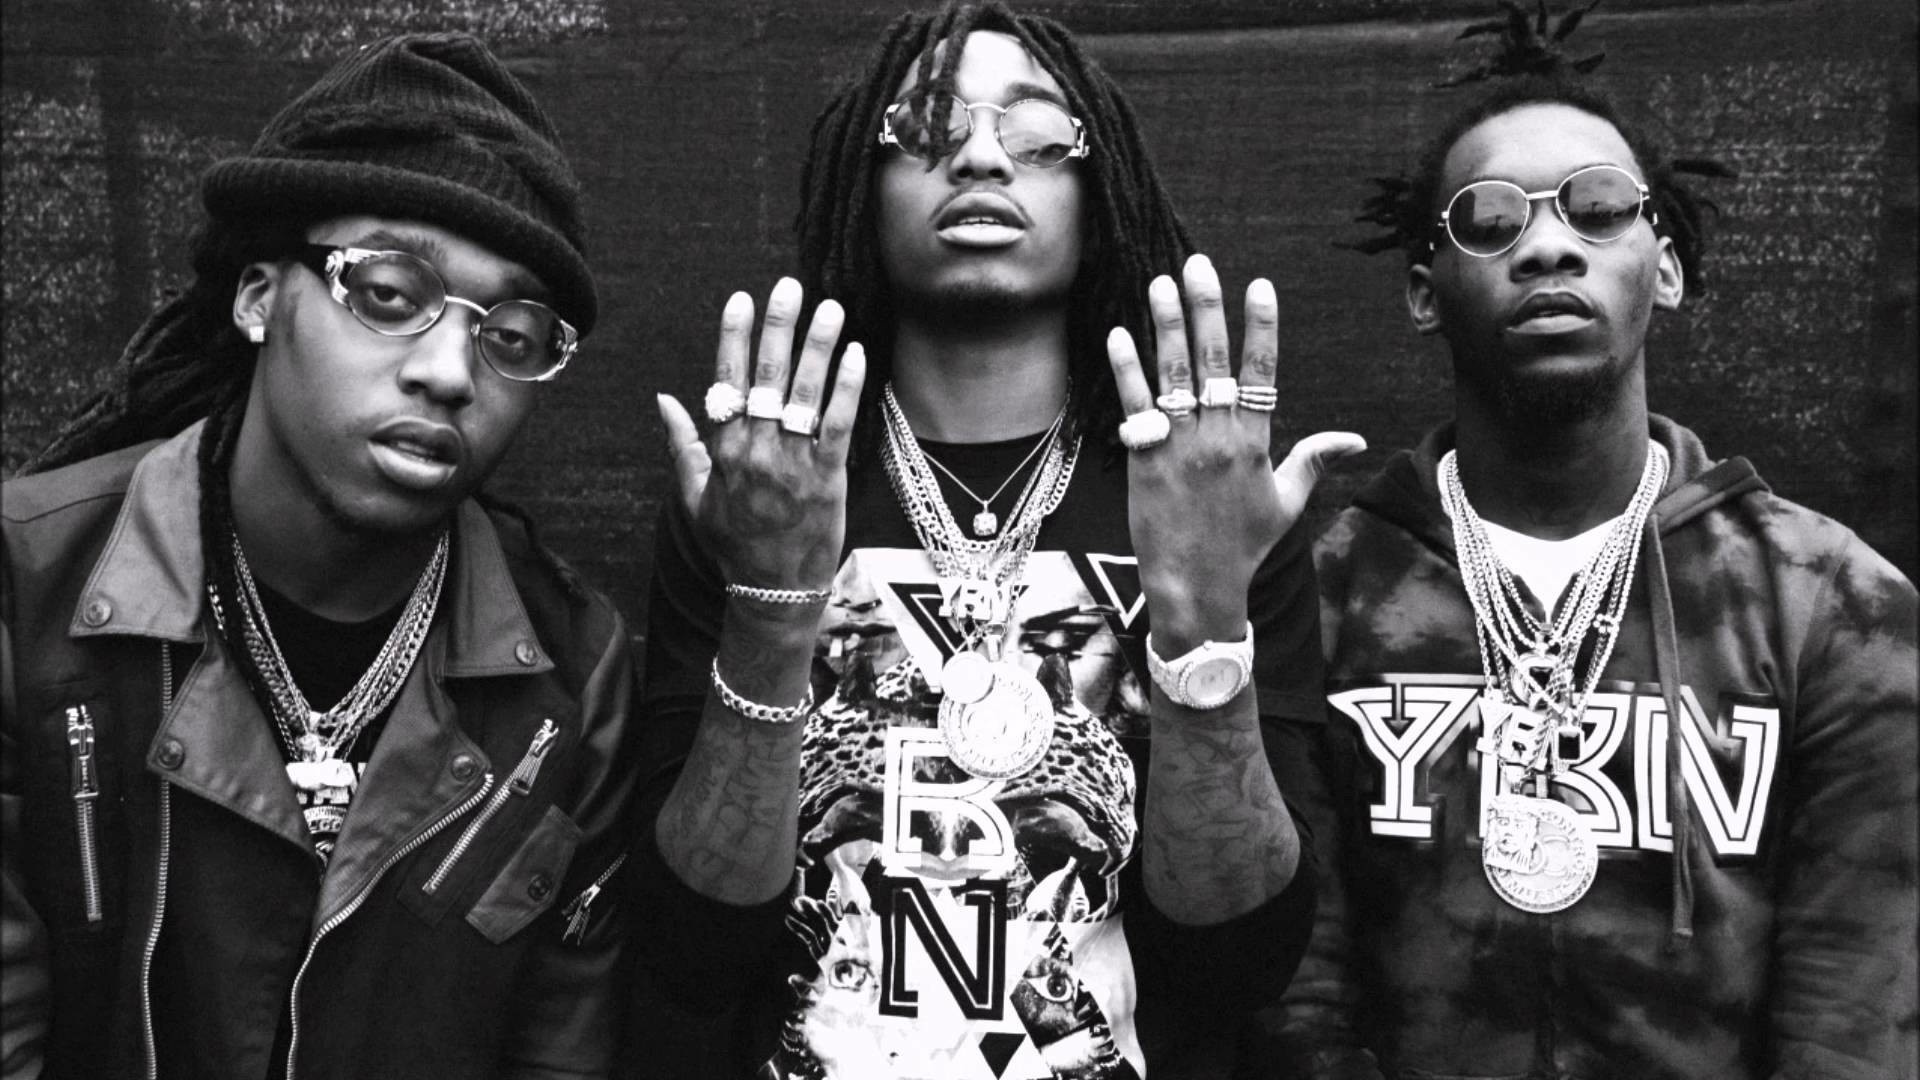 Migos, HD wallpapers, John Sellers' collection, Hip hop style, 1920x1080 Full HD Desktop